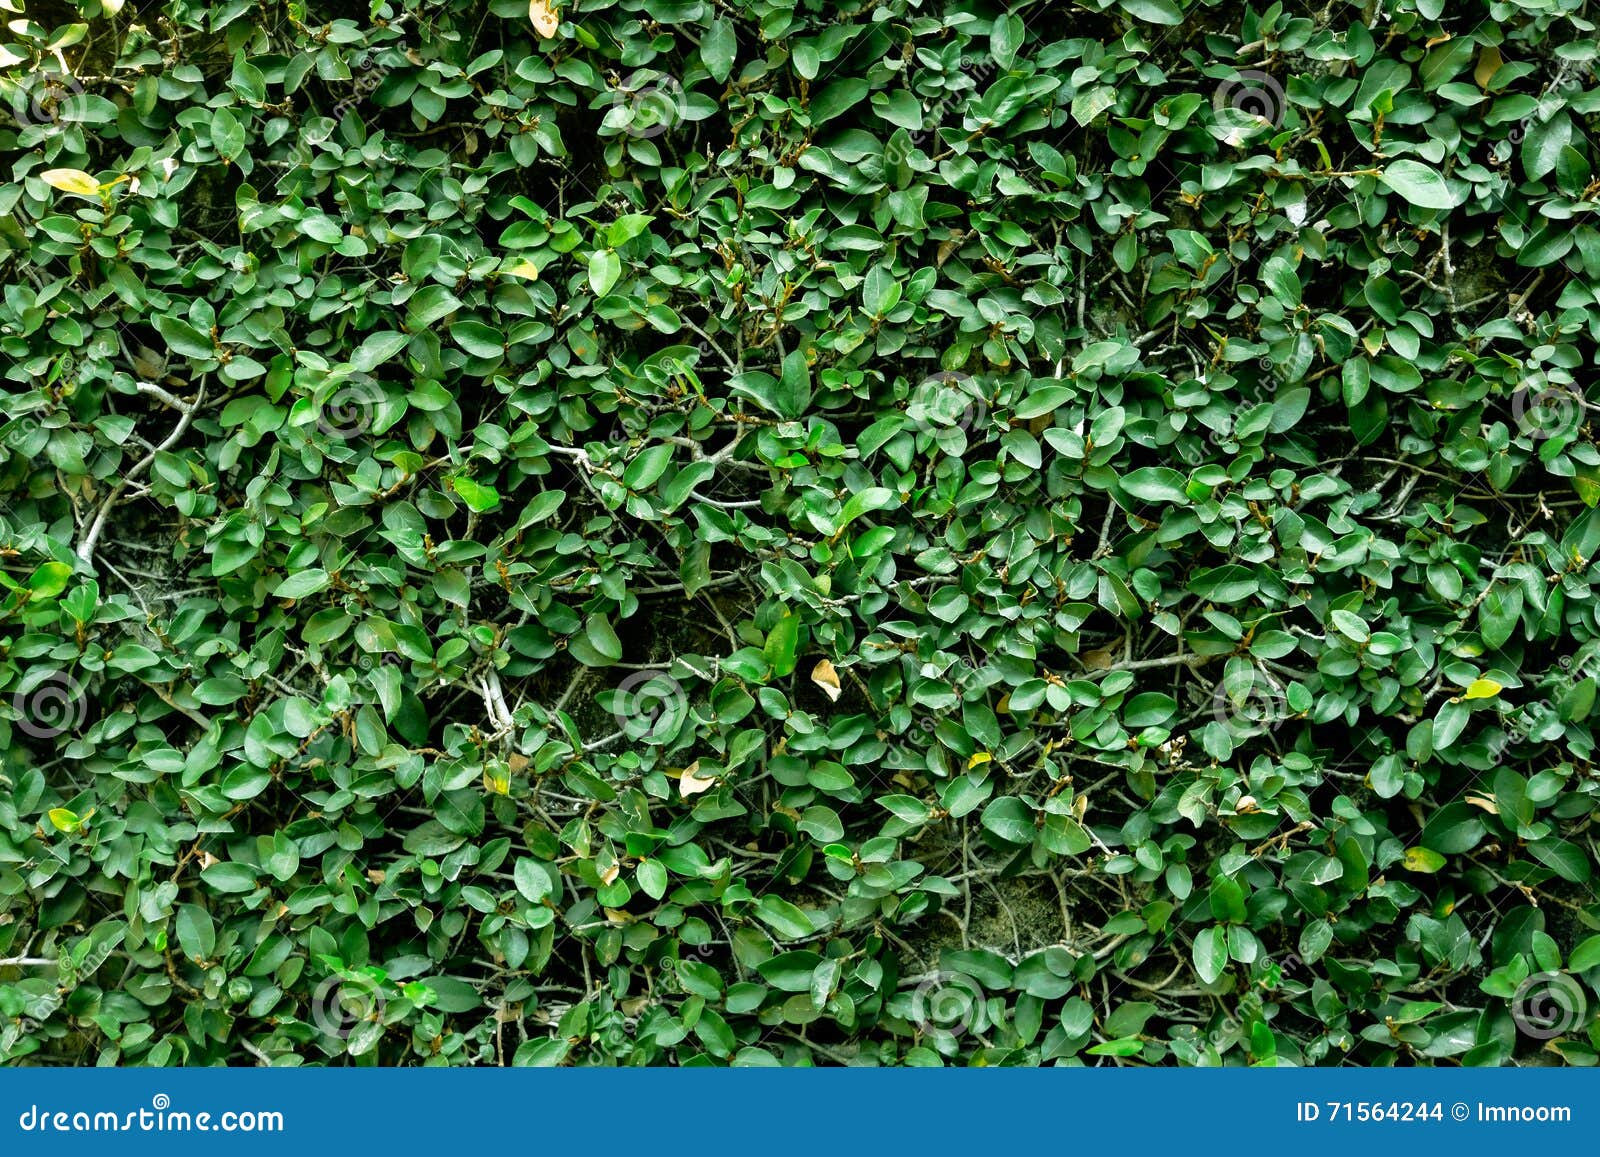 Plants wall background stock photo. Image of nature, ground - 71564244